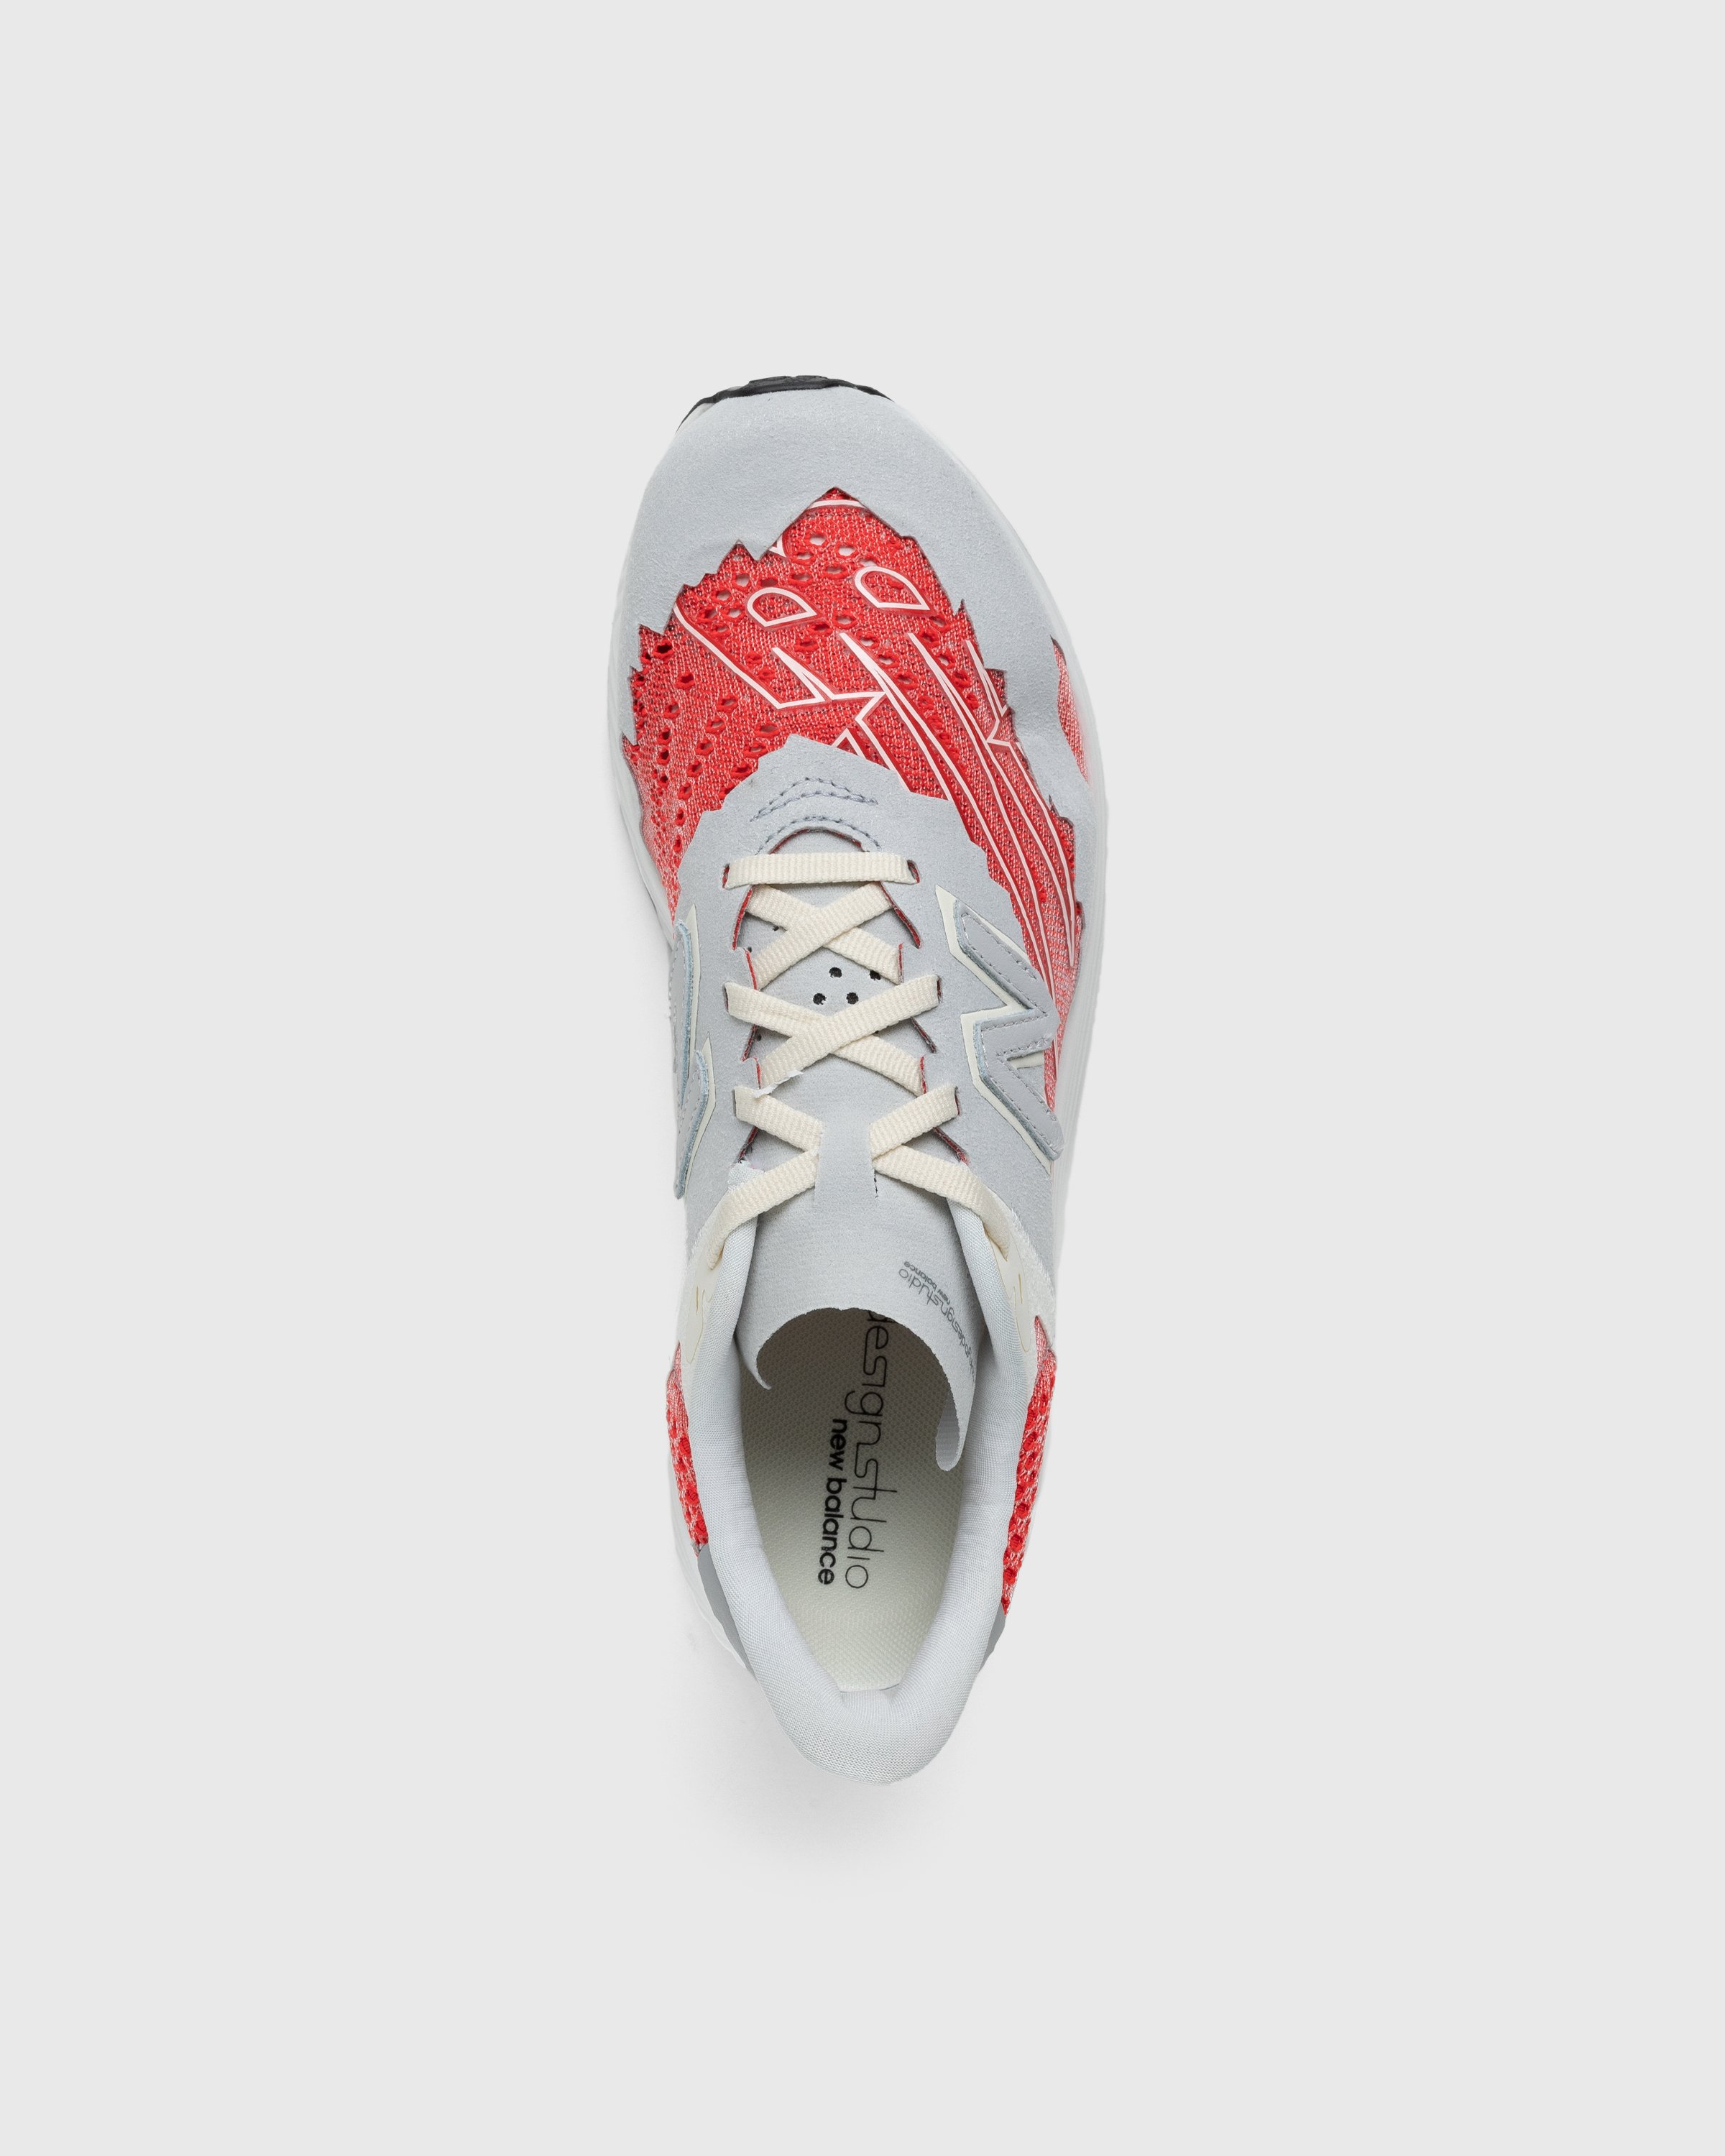 New Balance x Stone Island - FuelCell RC Elite v2 Neo Flame - Footwear - Red - Image 6